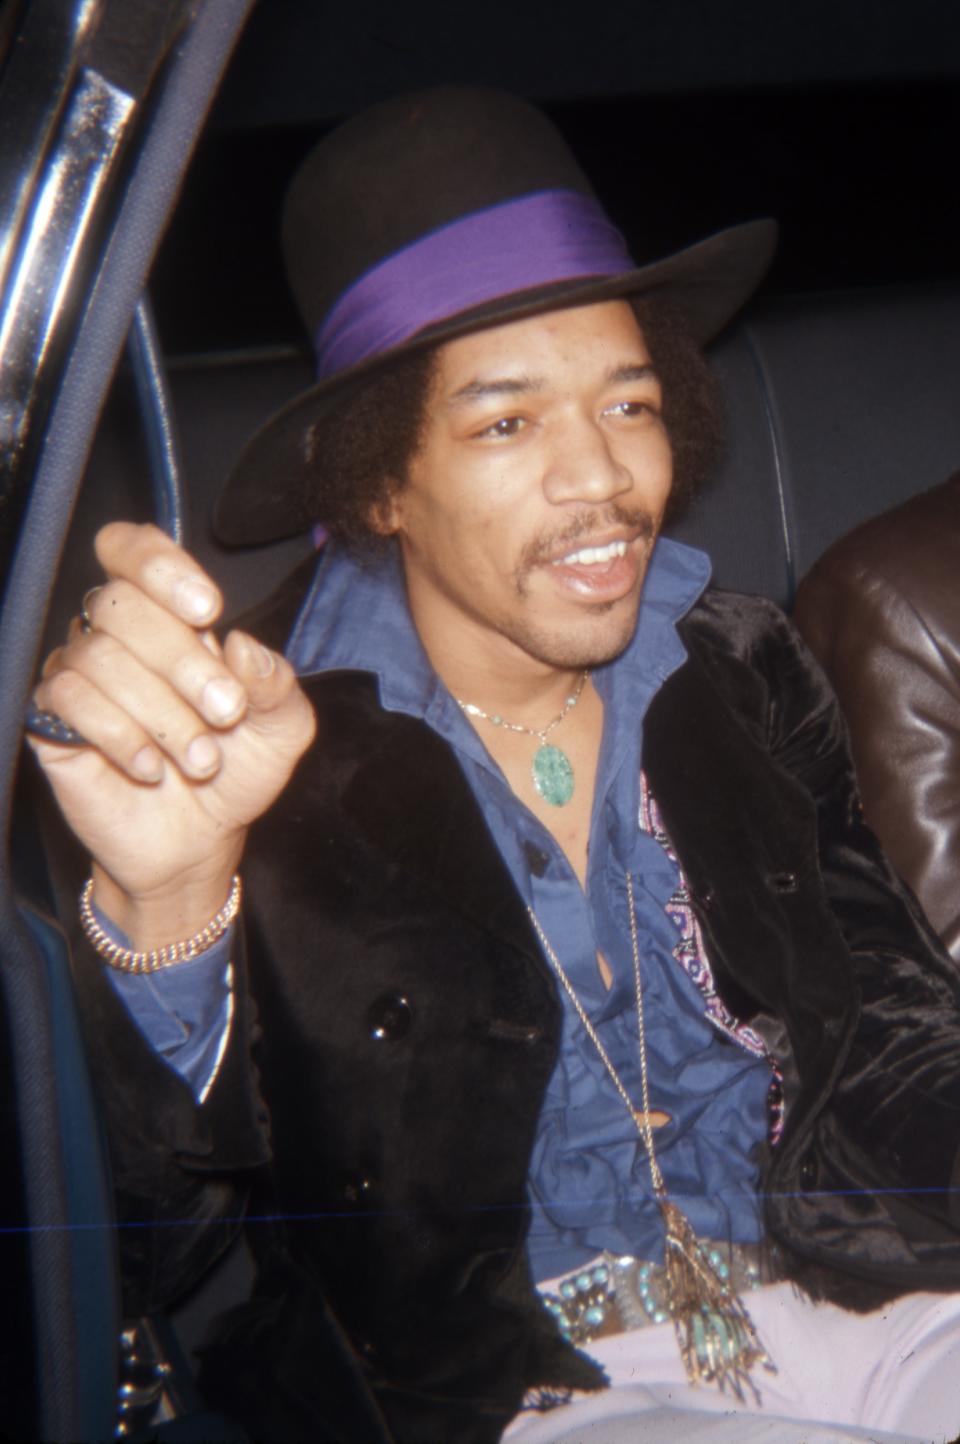 A photo of Jimi Hendrix in the back of a car.